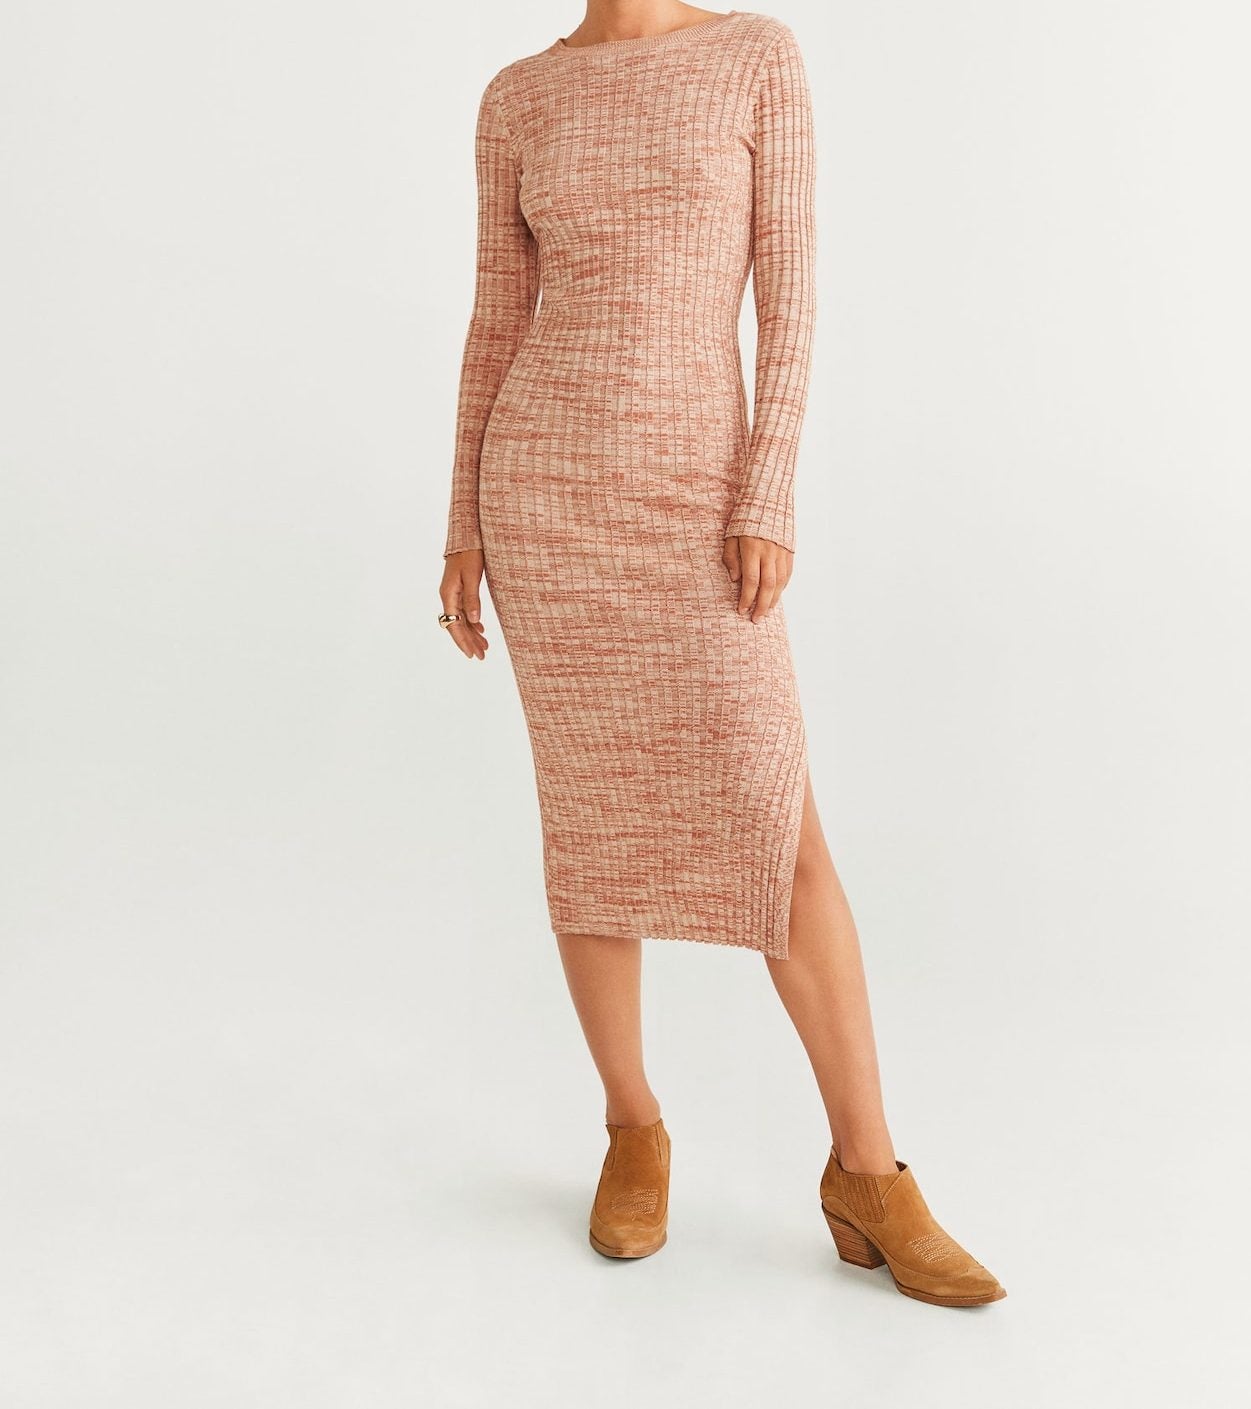 Keep It Cute And Warm With These Chic Sweater Dresses